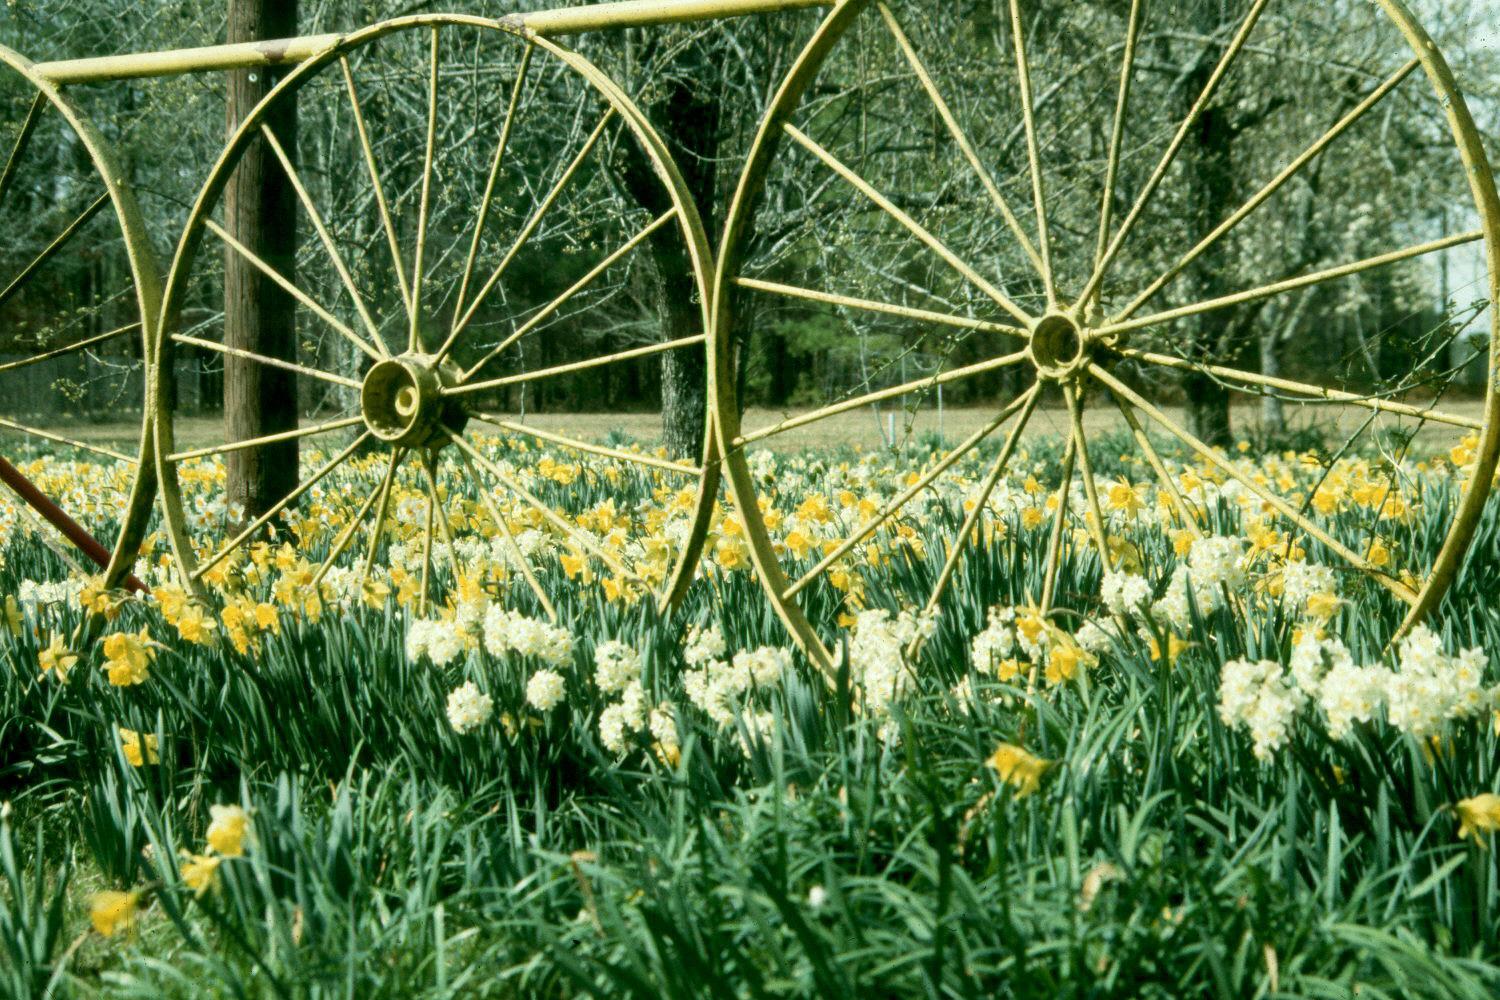 The narcissus is a stalwart garden favorite.